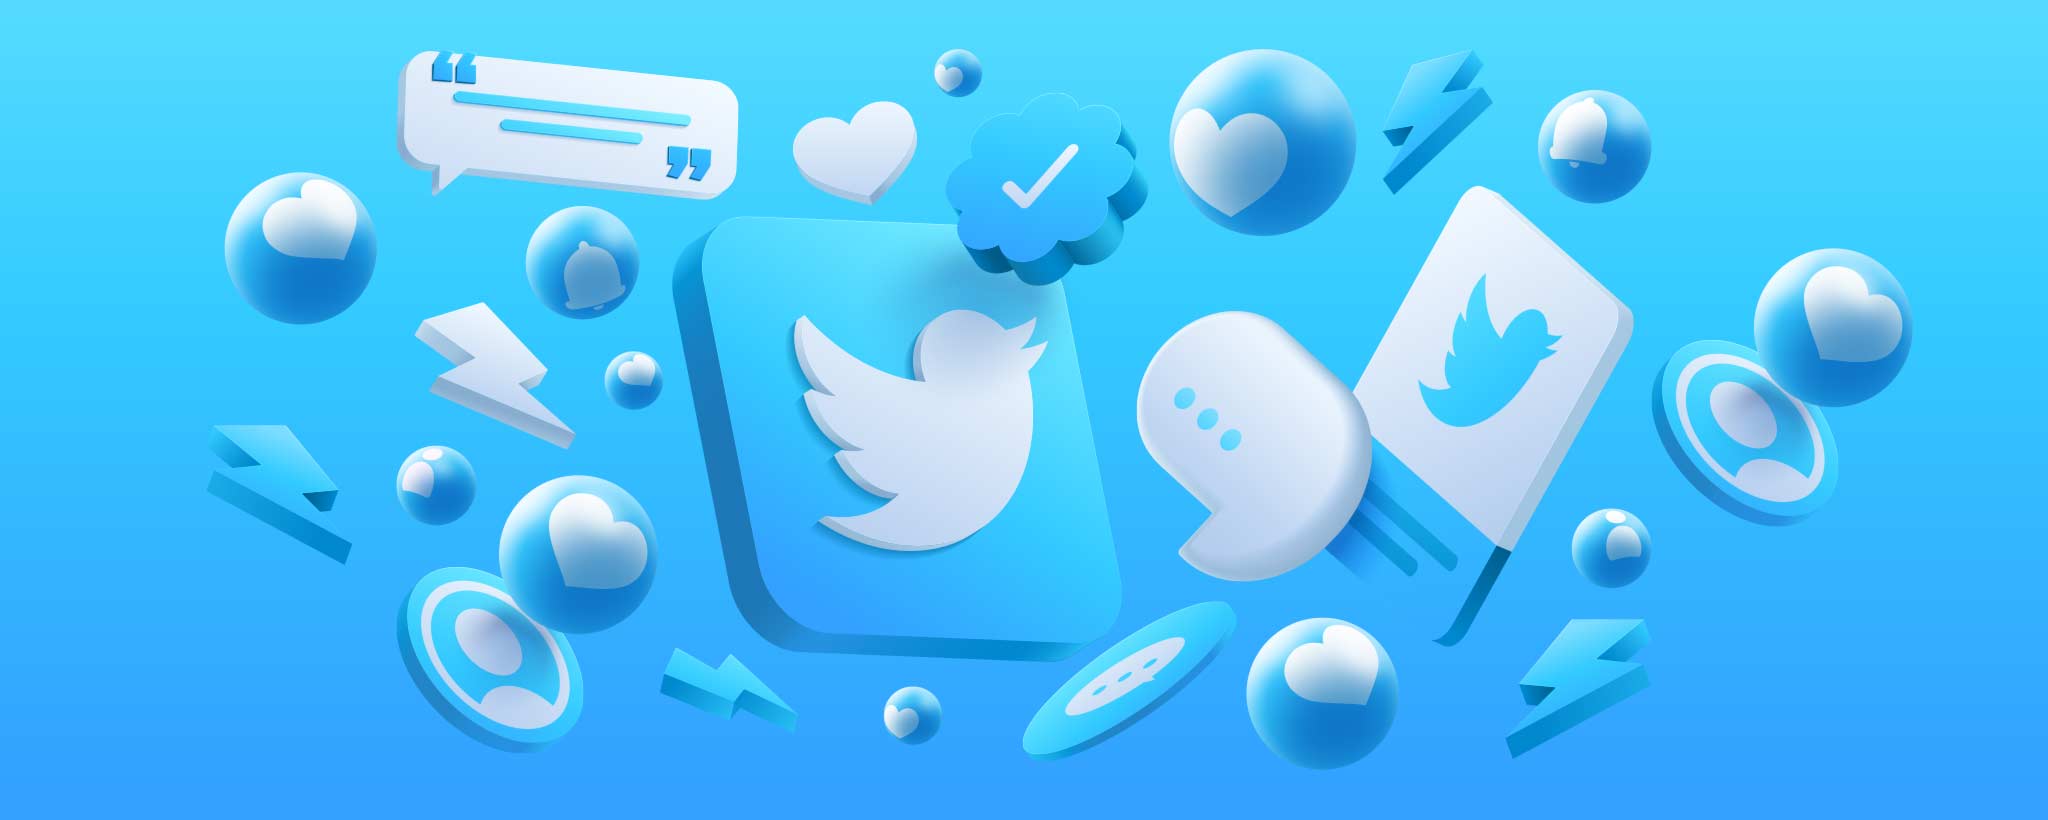 'Twitter icons'